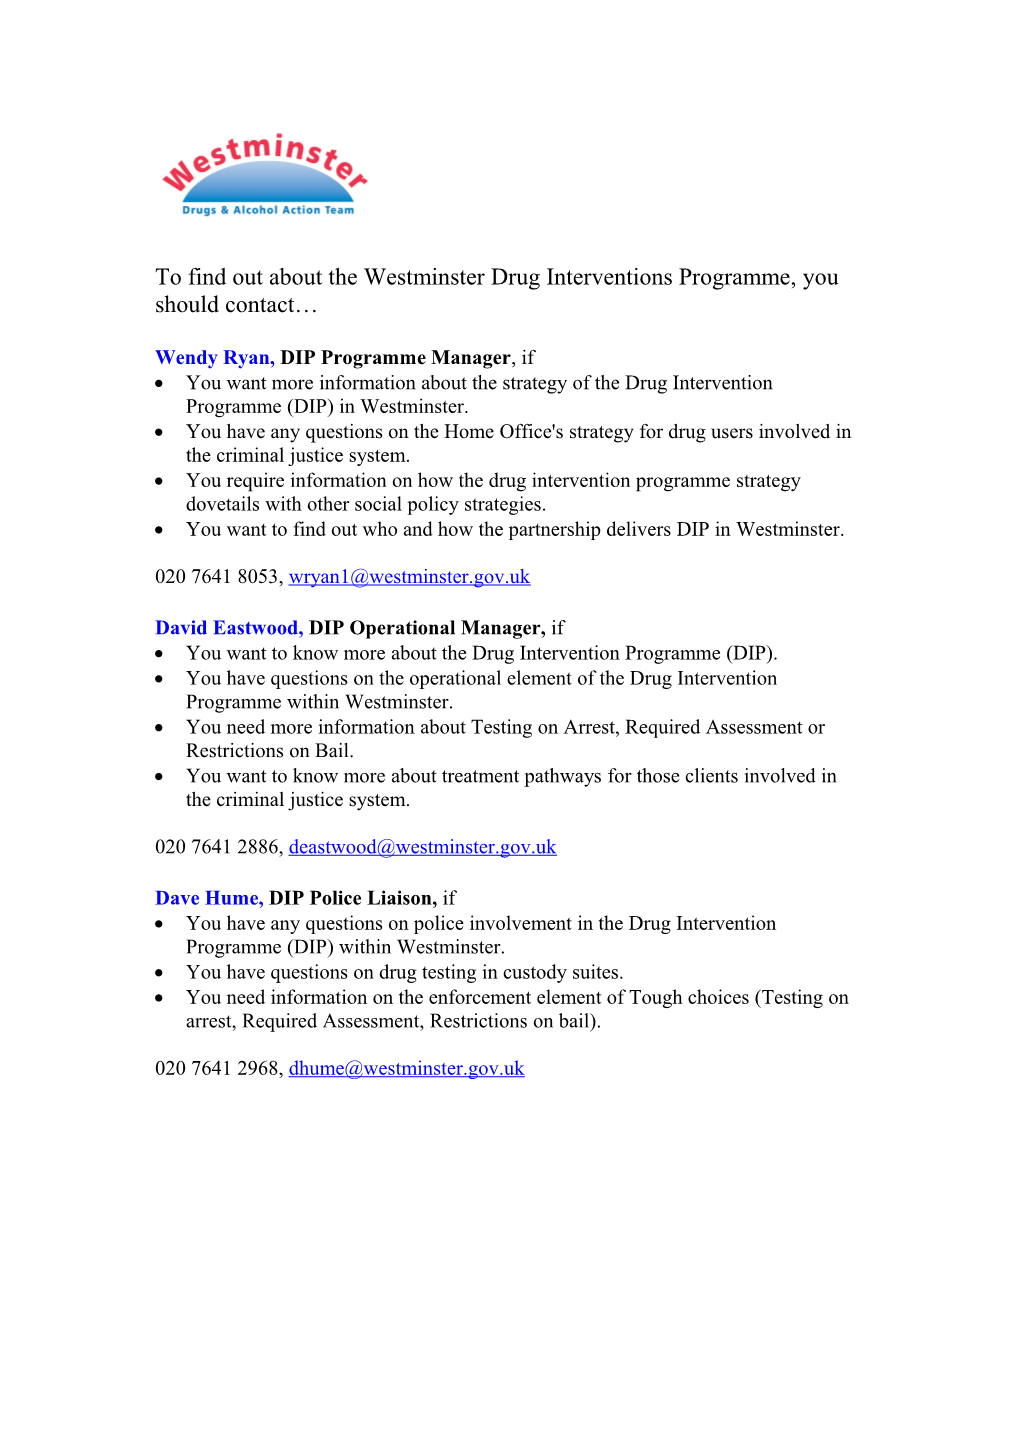 To Find out About the Westminster Drug Interventions Programme, You Should Contact